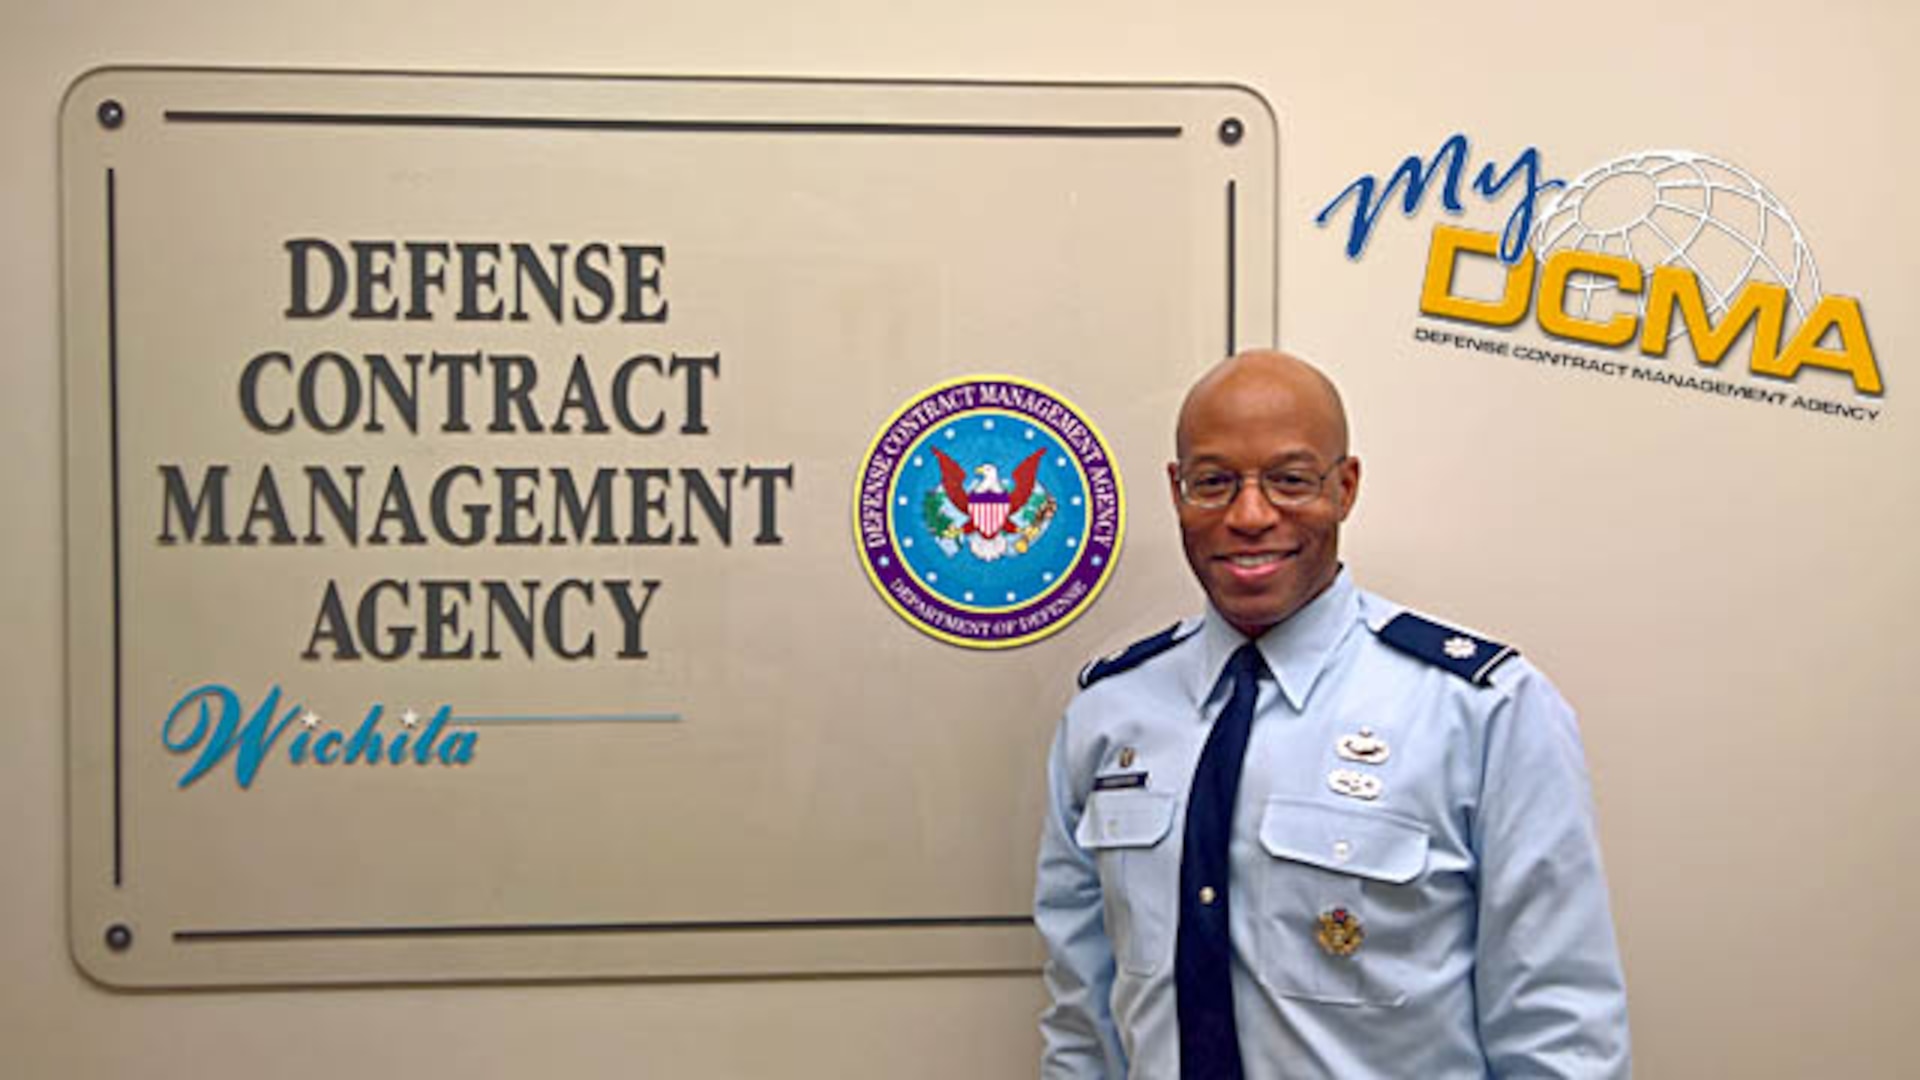 My DCMA showcases the Defense Contract Management Agency’s experienced and diverse workforce and highlights what being a part of the national defense team means to them. Today we meet Air Force Lt. Col. James “Luther” Vandross. (DCMA graphic by Thomas Perry)